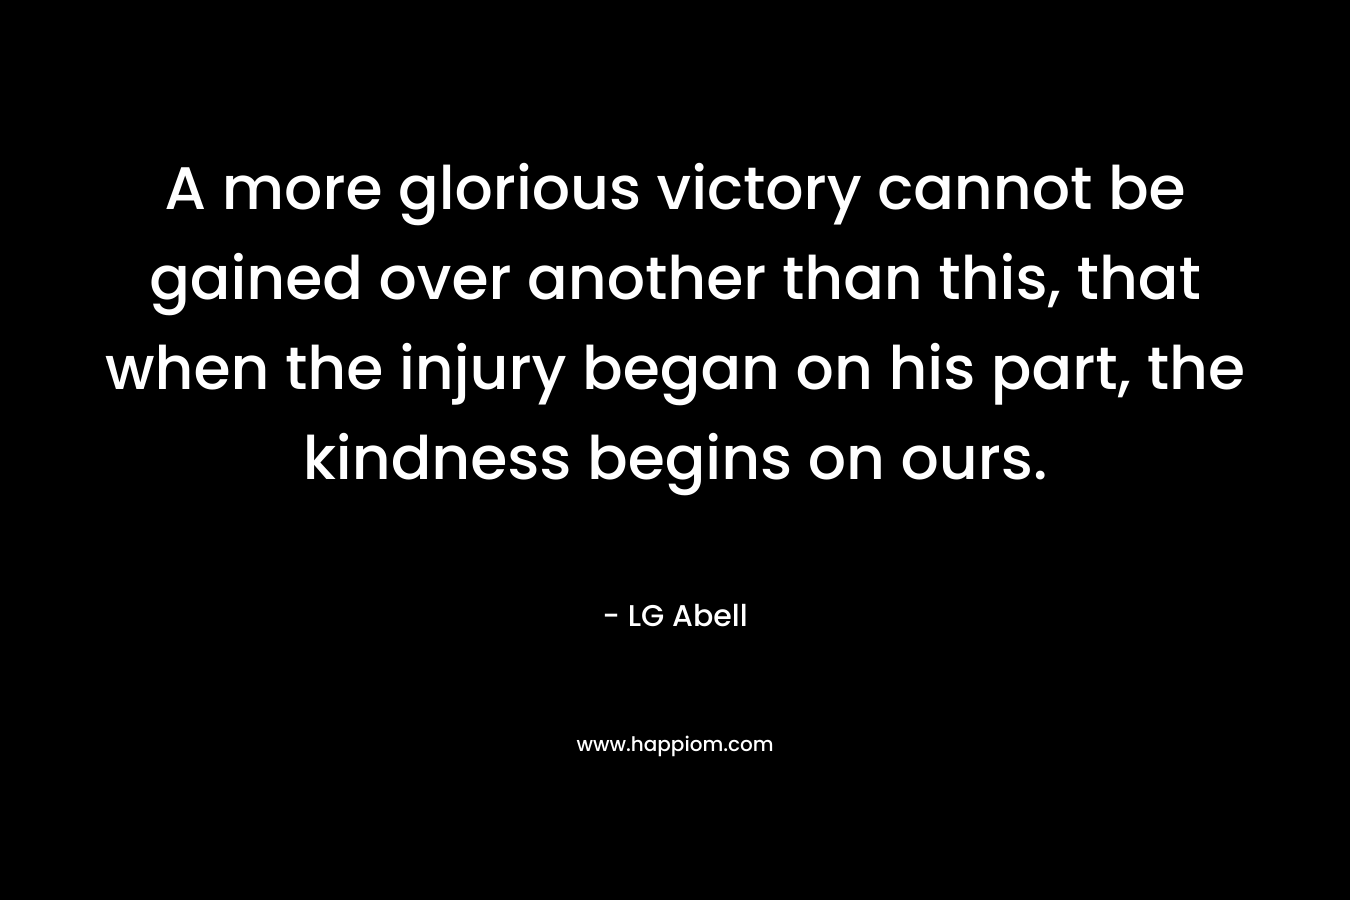 A more glorious victory cannot be gained over another than this, that when the injury began on his part, the kindness begins on ours.